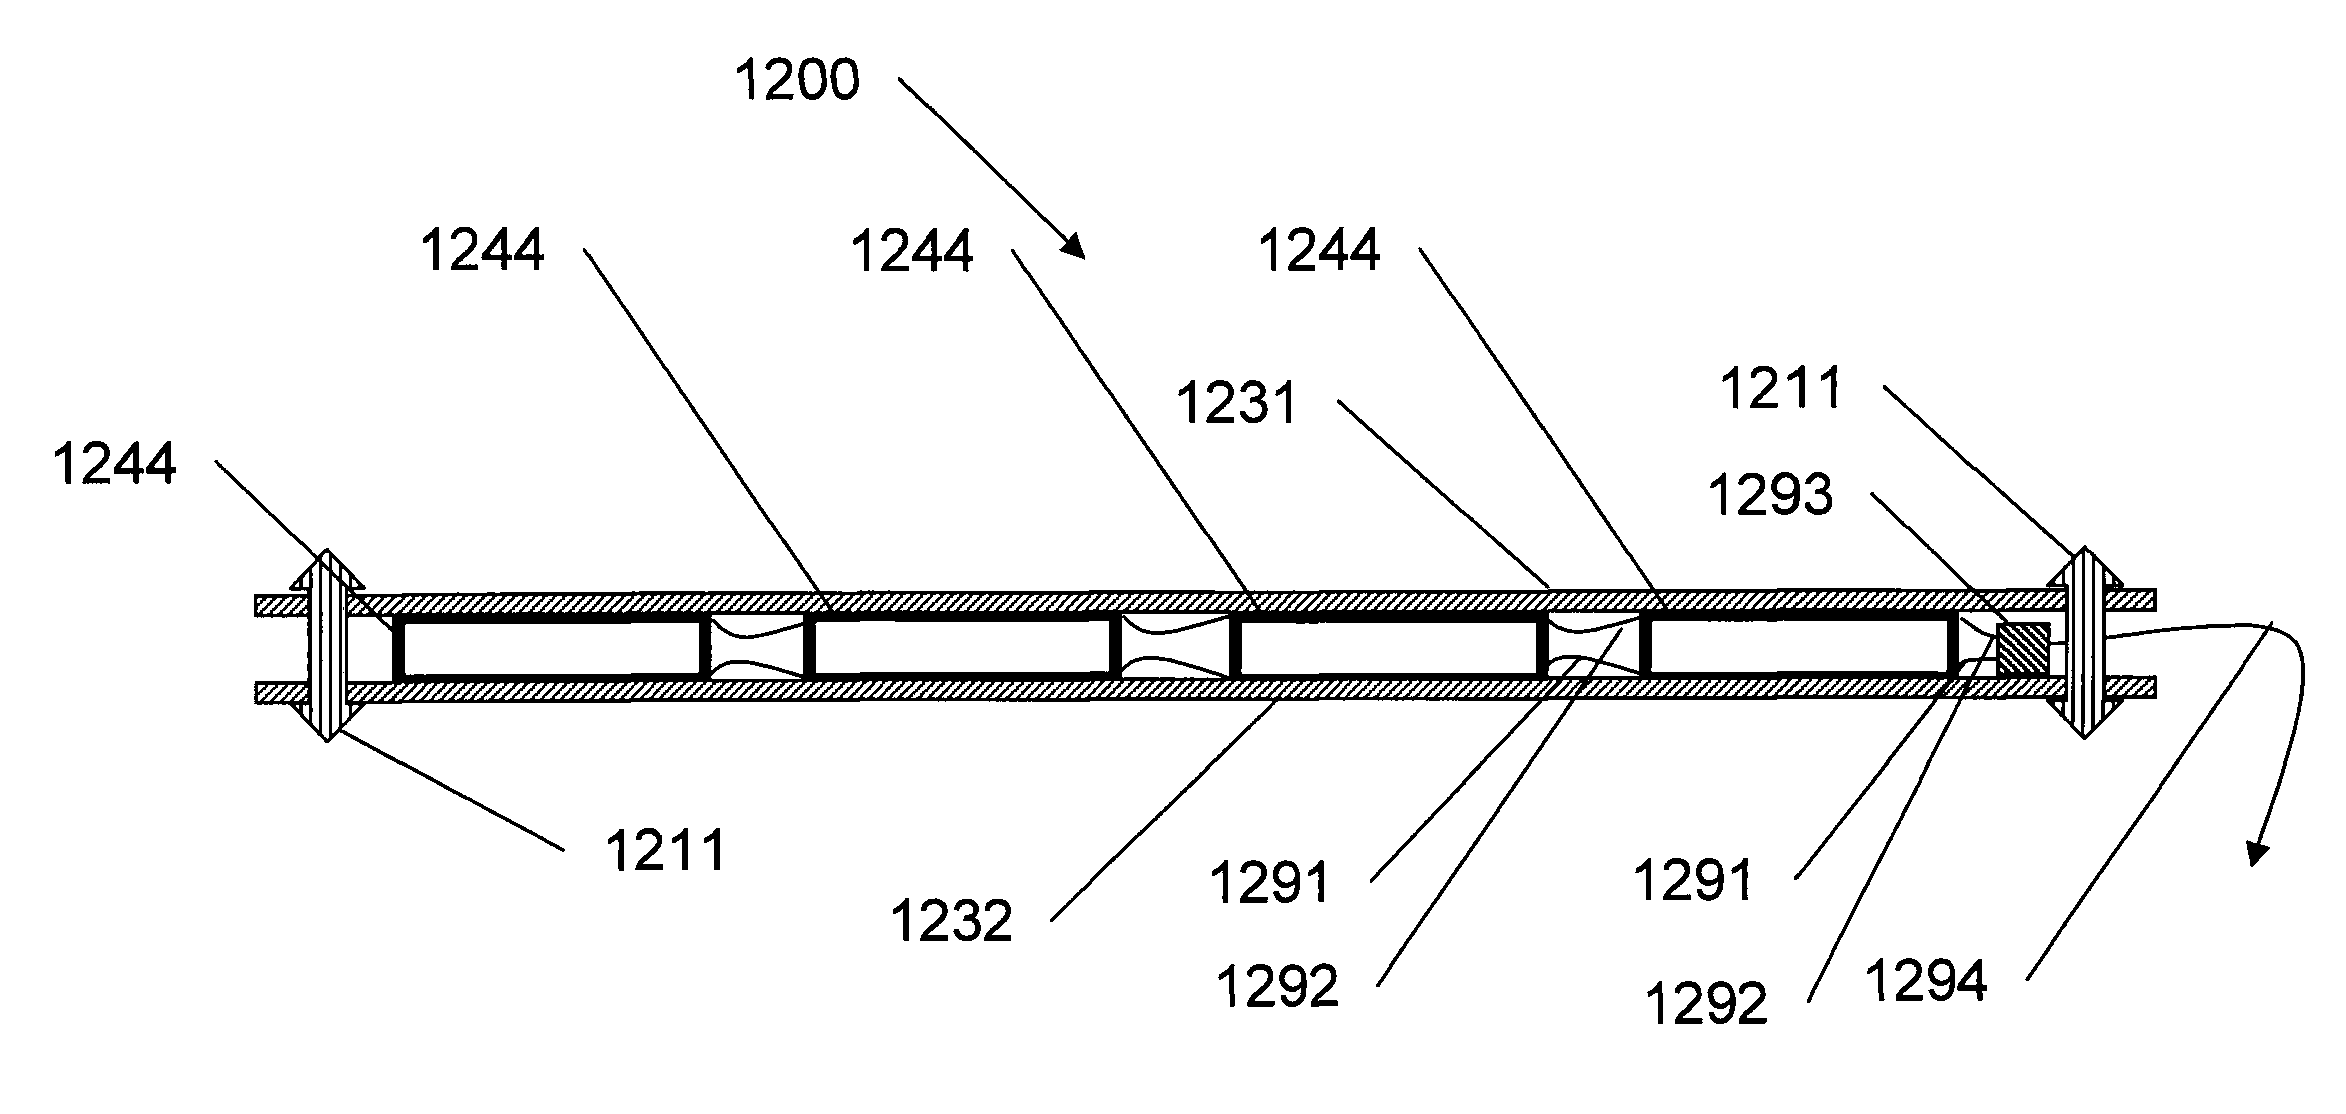 Power harvesting apparatus, system and method